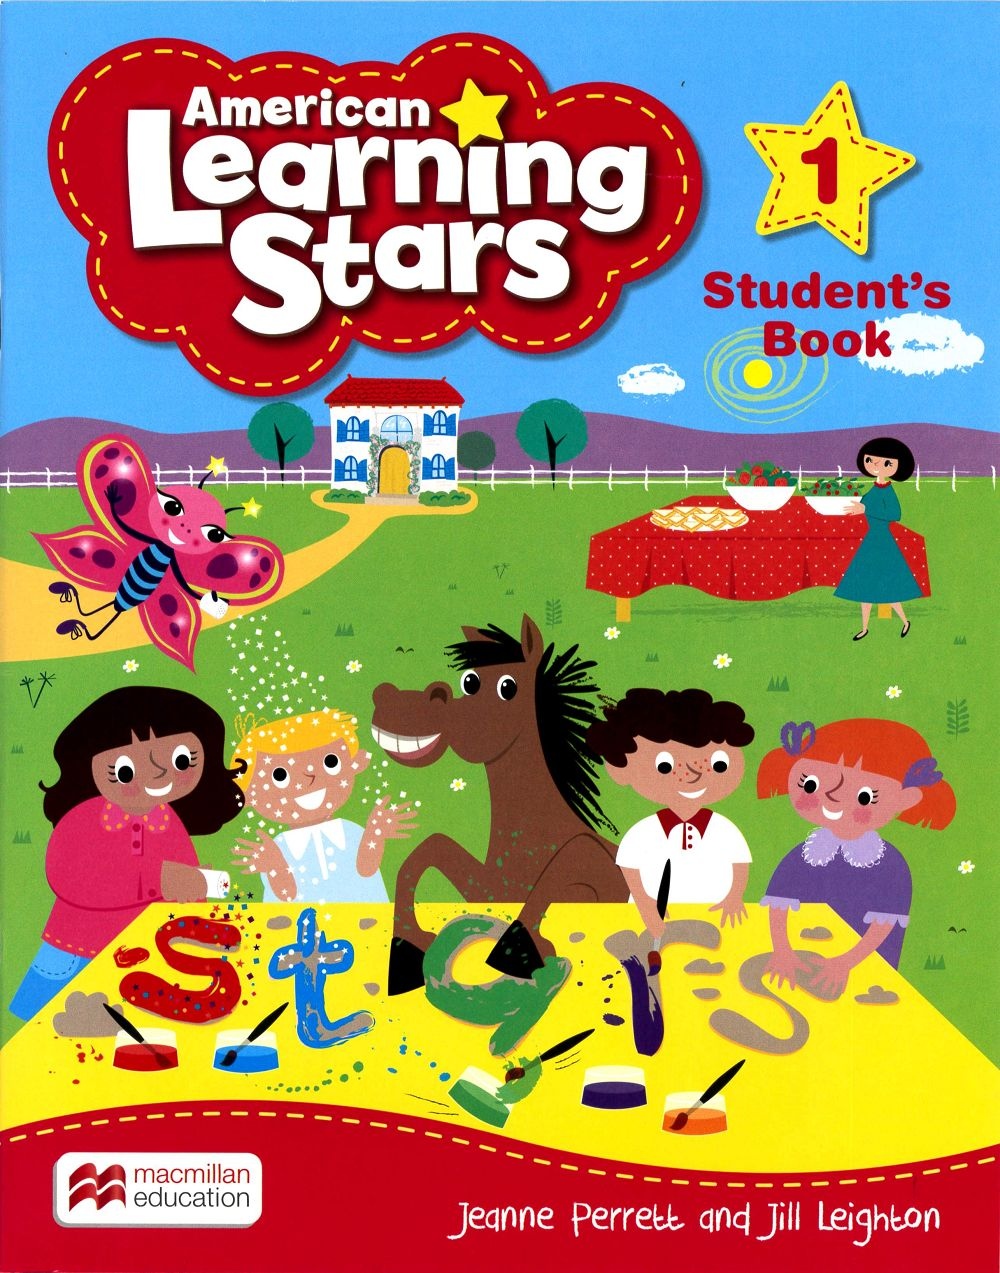 American Learning Stars (1) Student’s Book